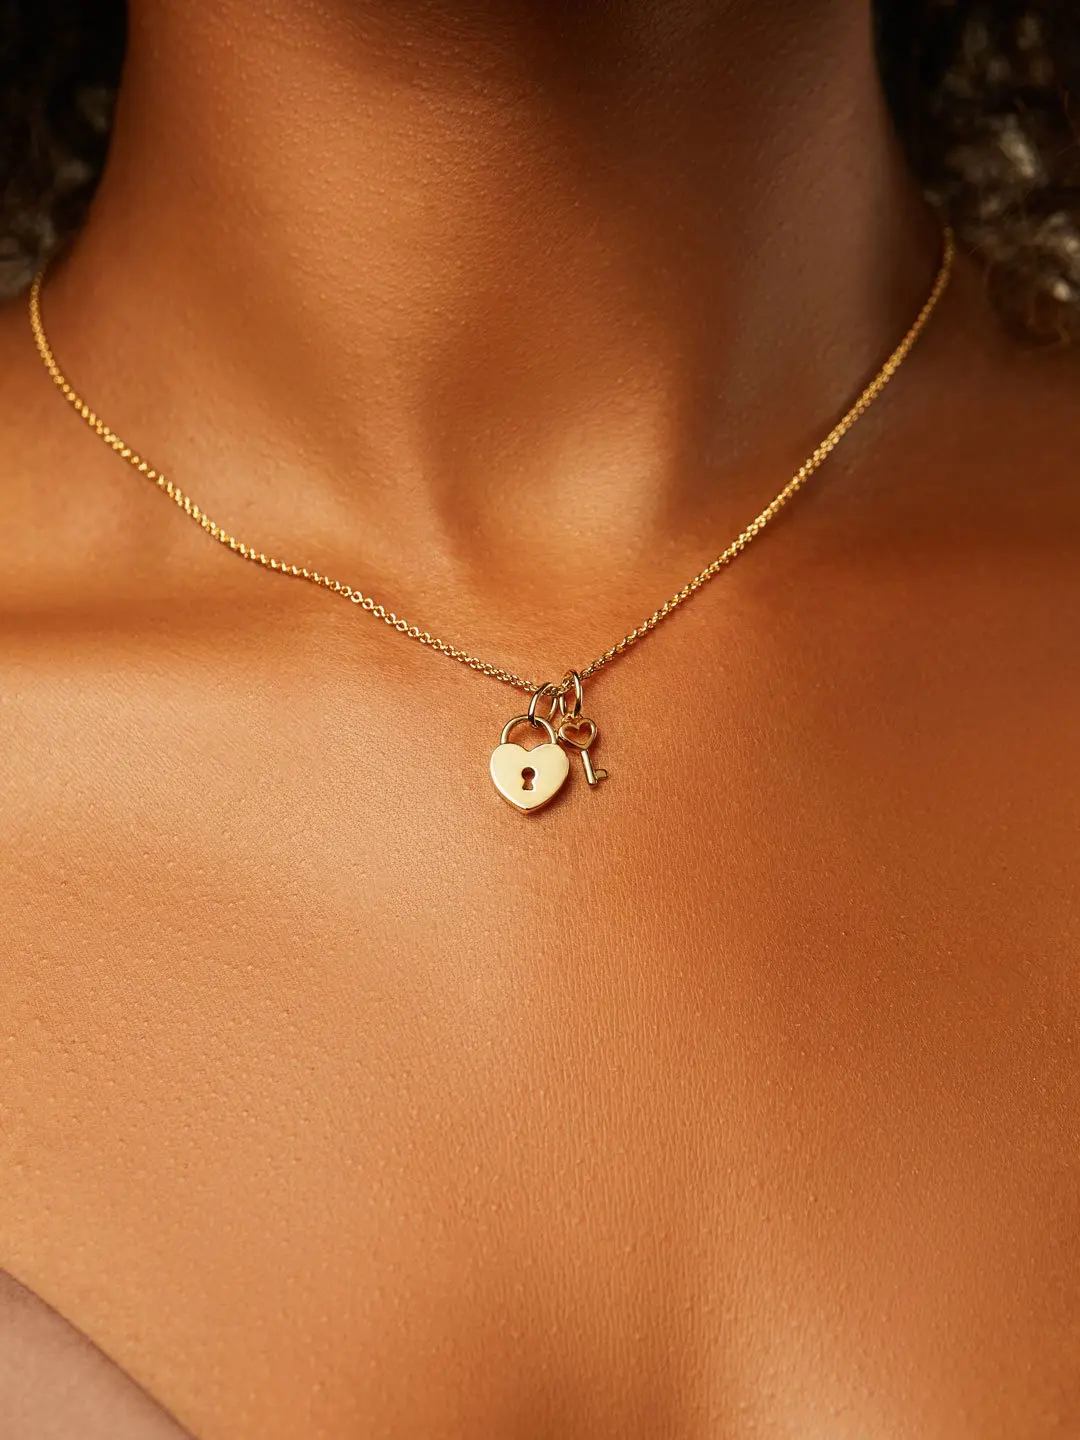 Heart Gold Necklace Lock and Key Necklace Dainty Heart Lock 